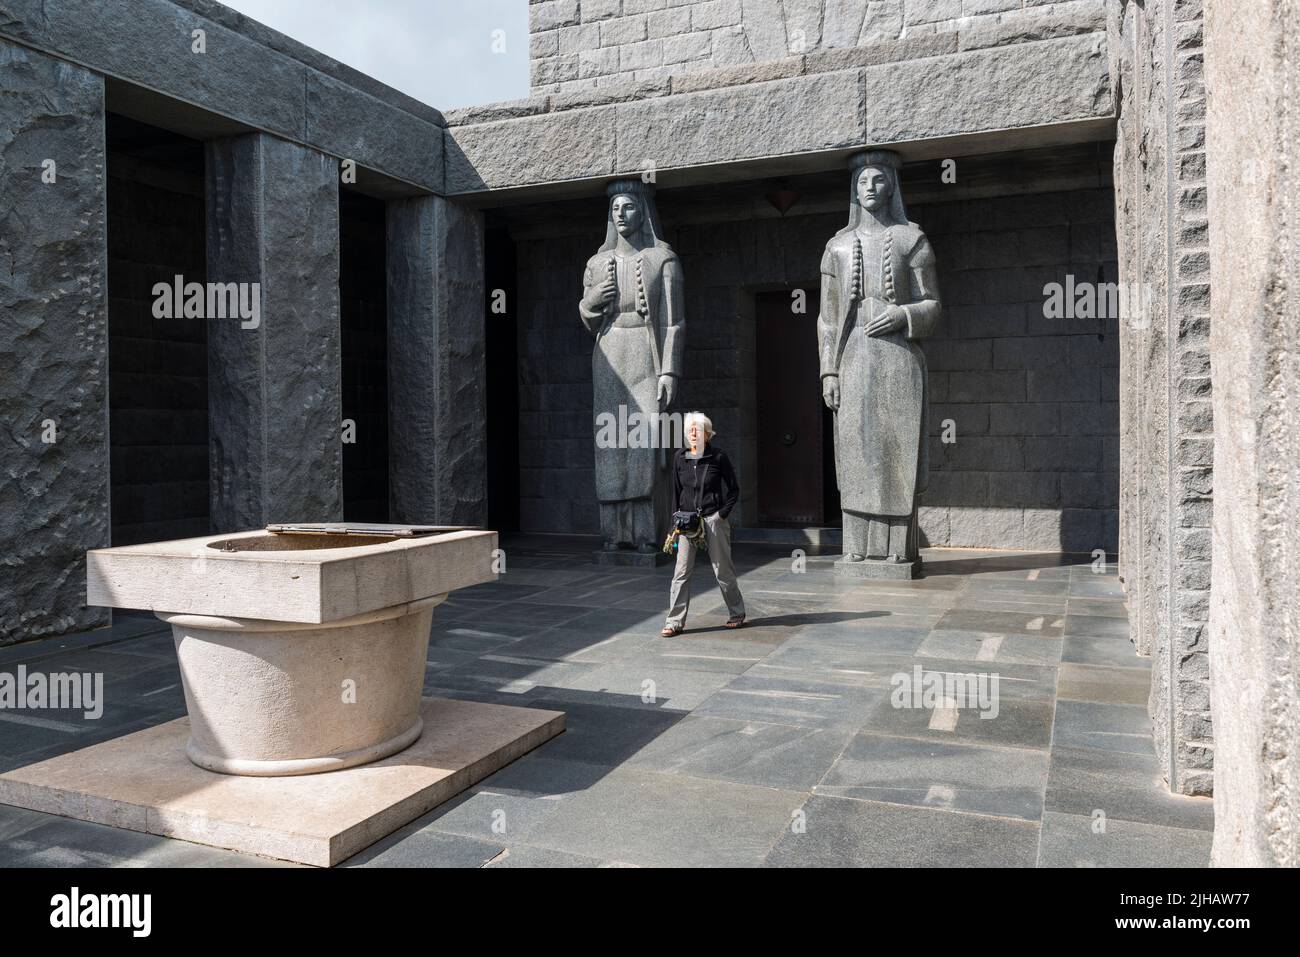 Elderly woman walking out of the Mausoleum of Negos of which the entrance is supported by 2 caryatids, sculpted female Montenegrin figures.Montenegro. Stock Photo